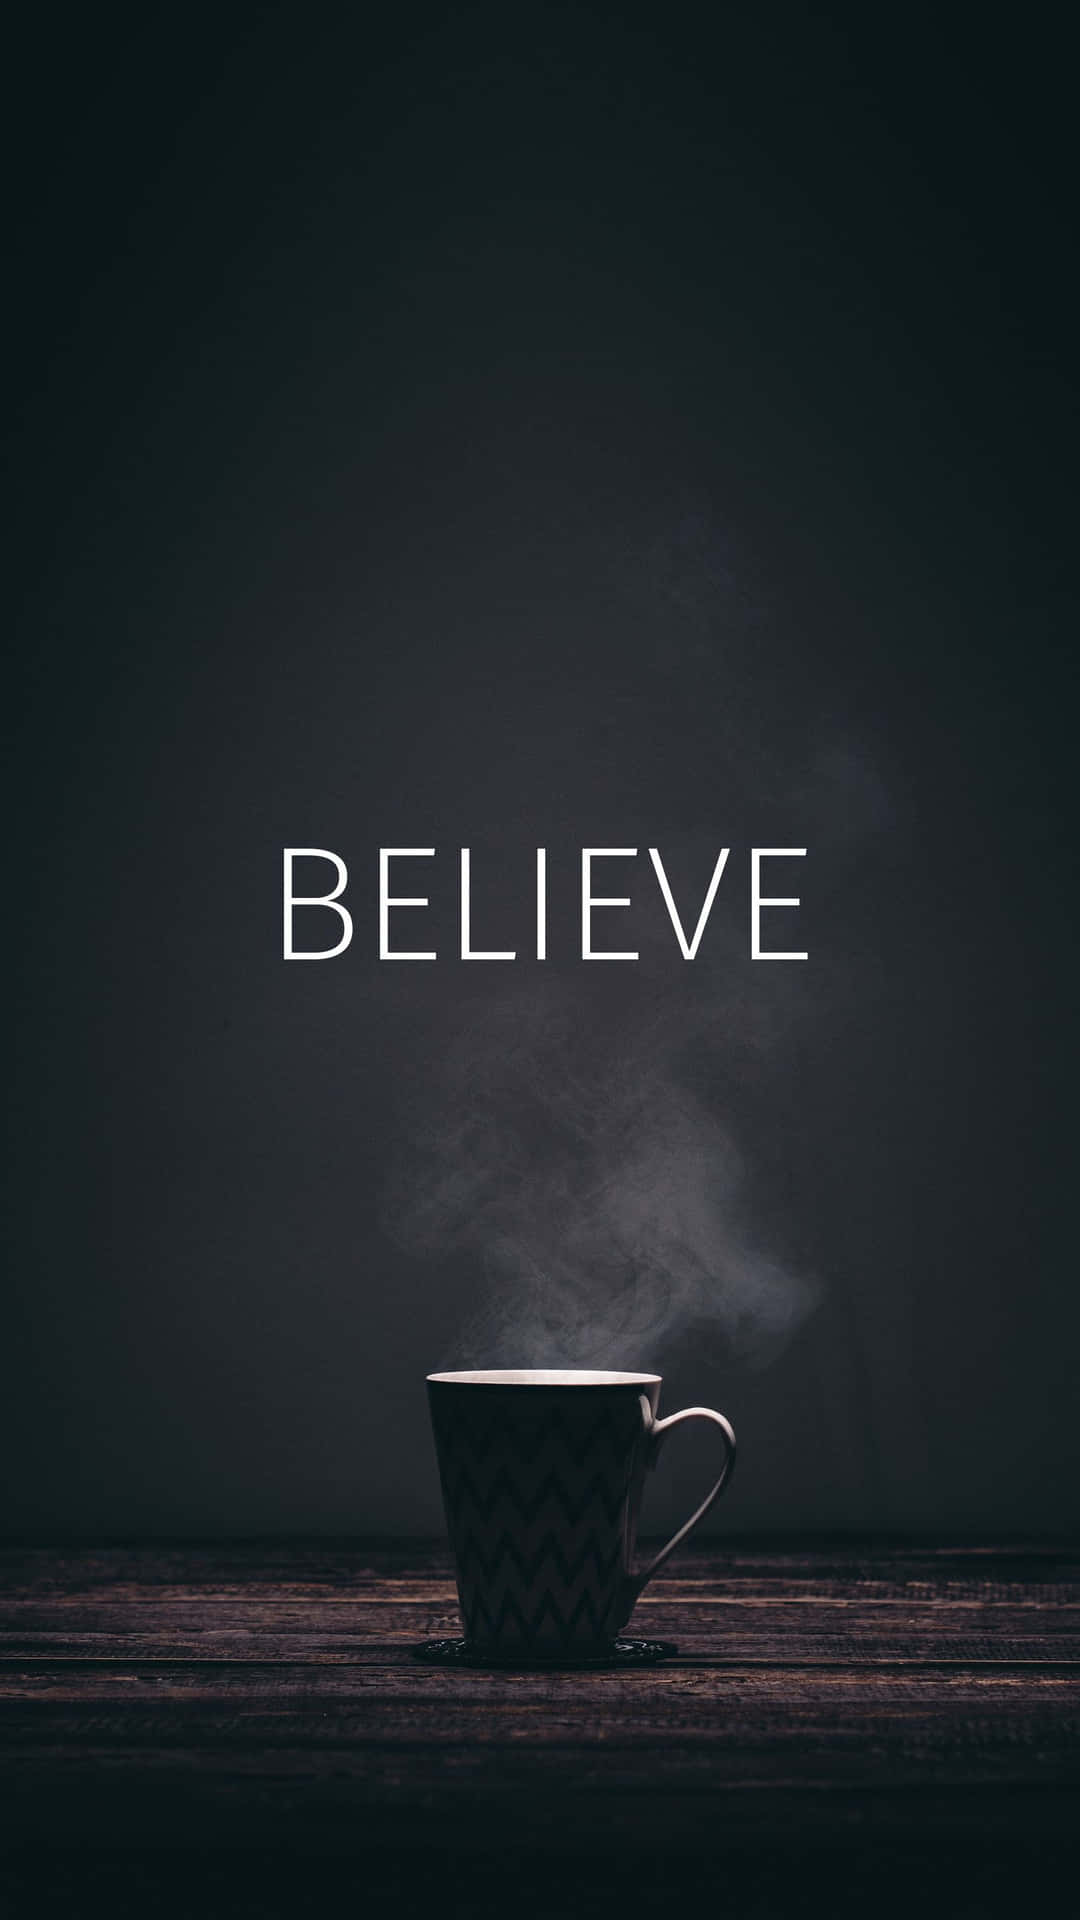 A Cup Of Coffee With The Word Believe On It